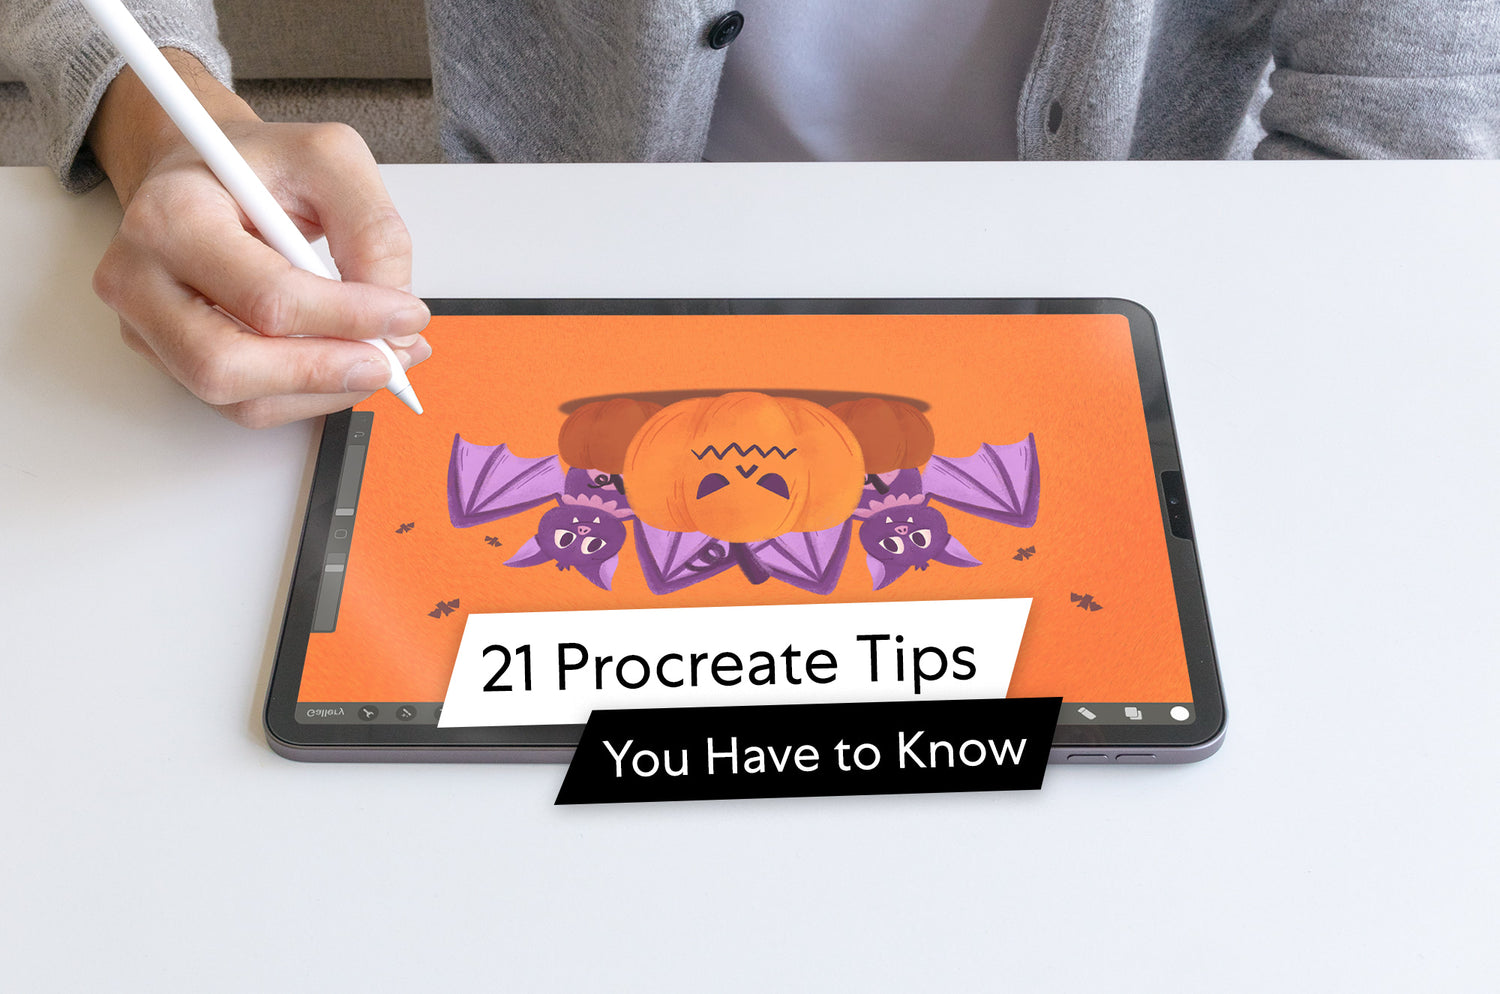 21 Procreate Tips You Have to Know